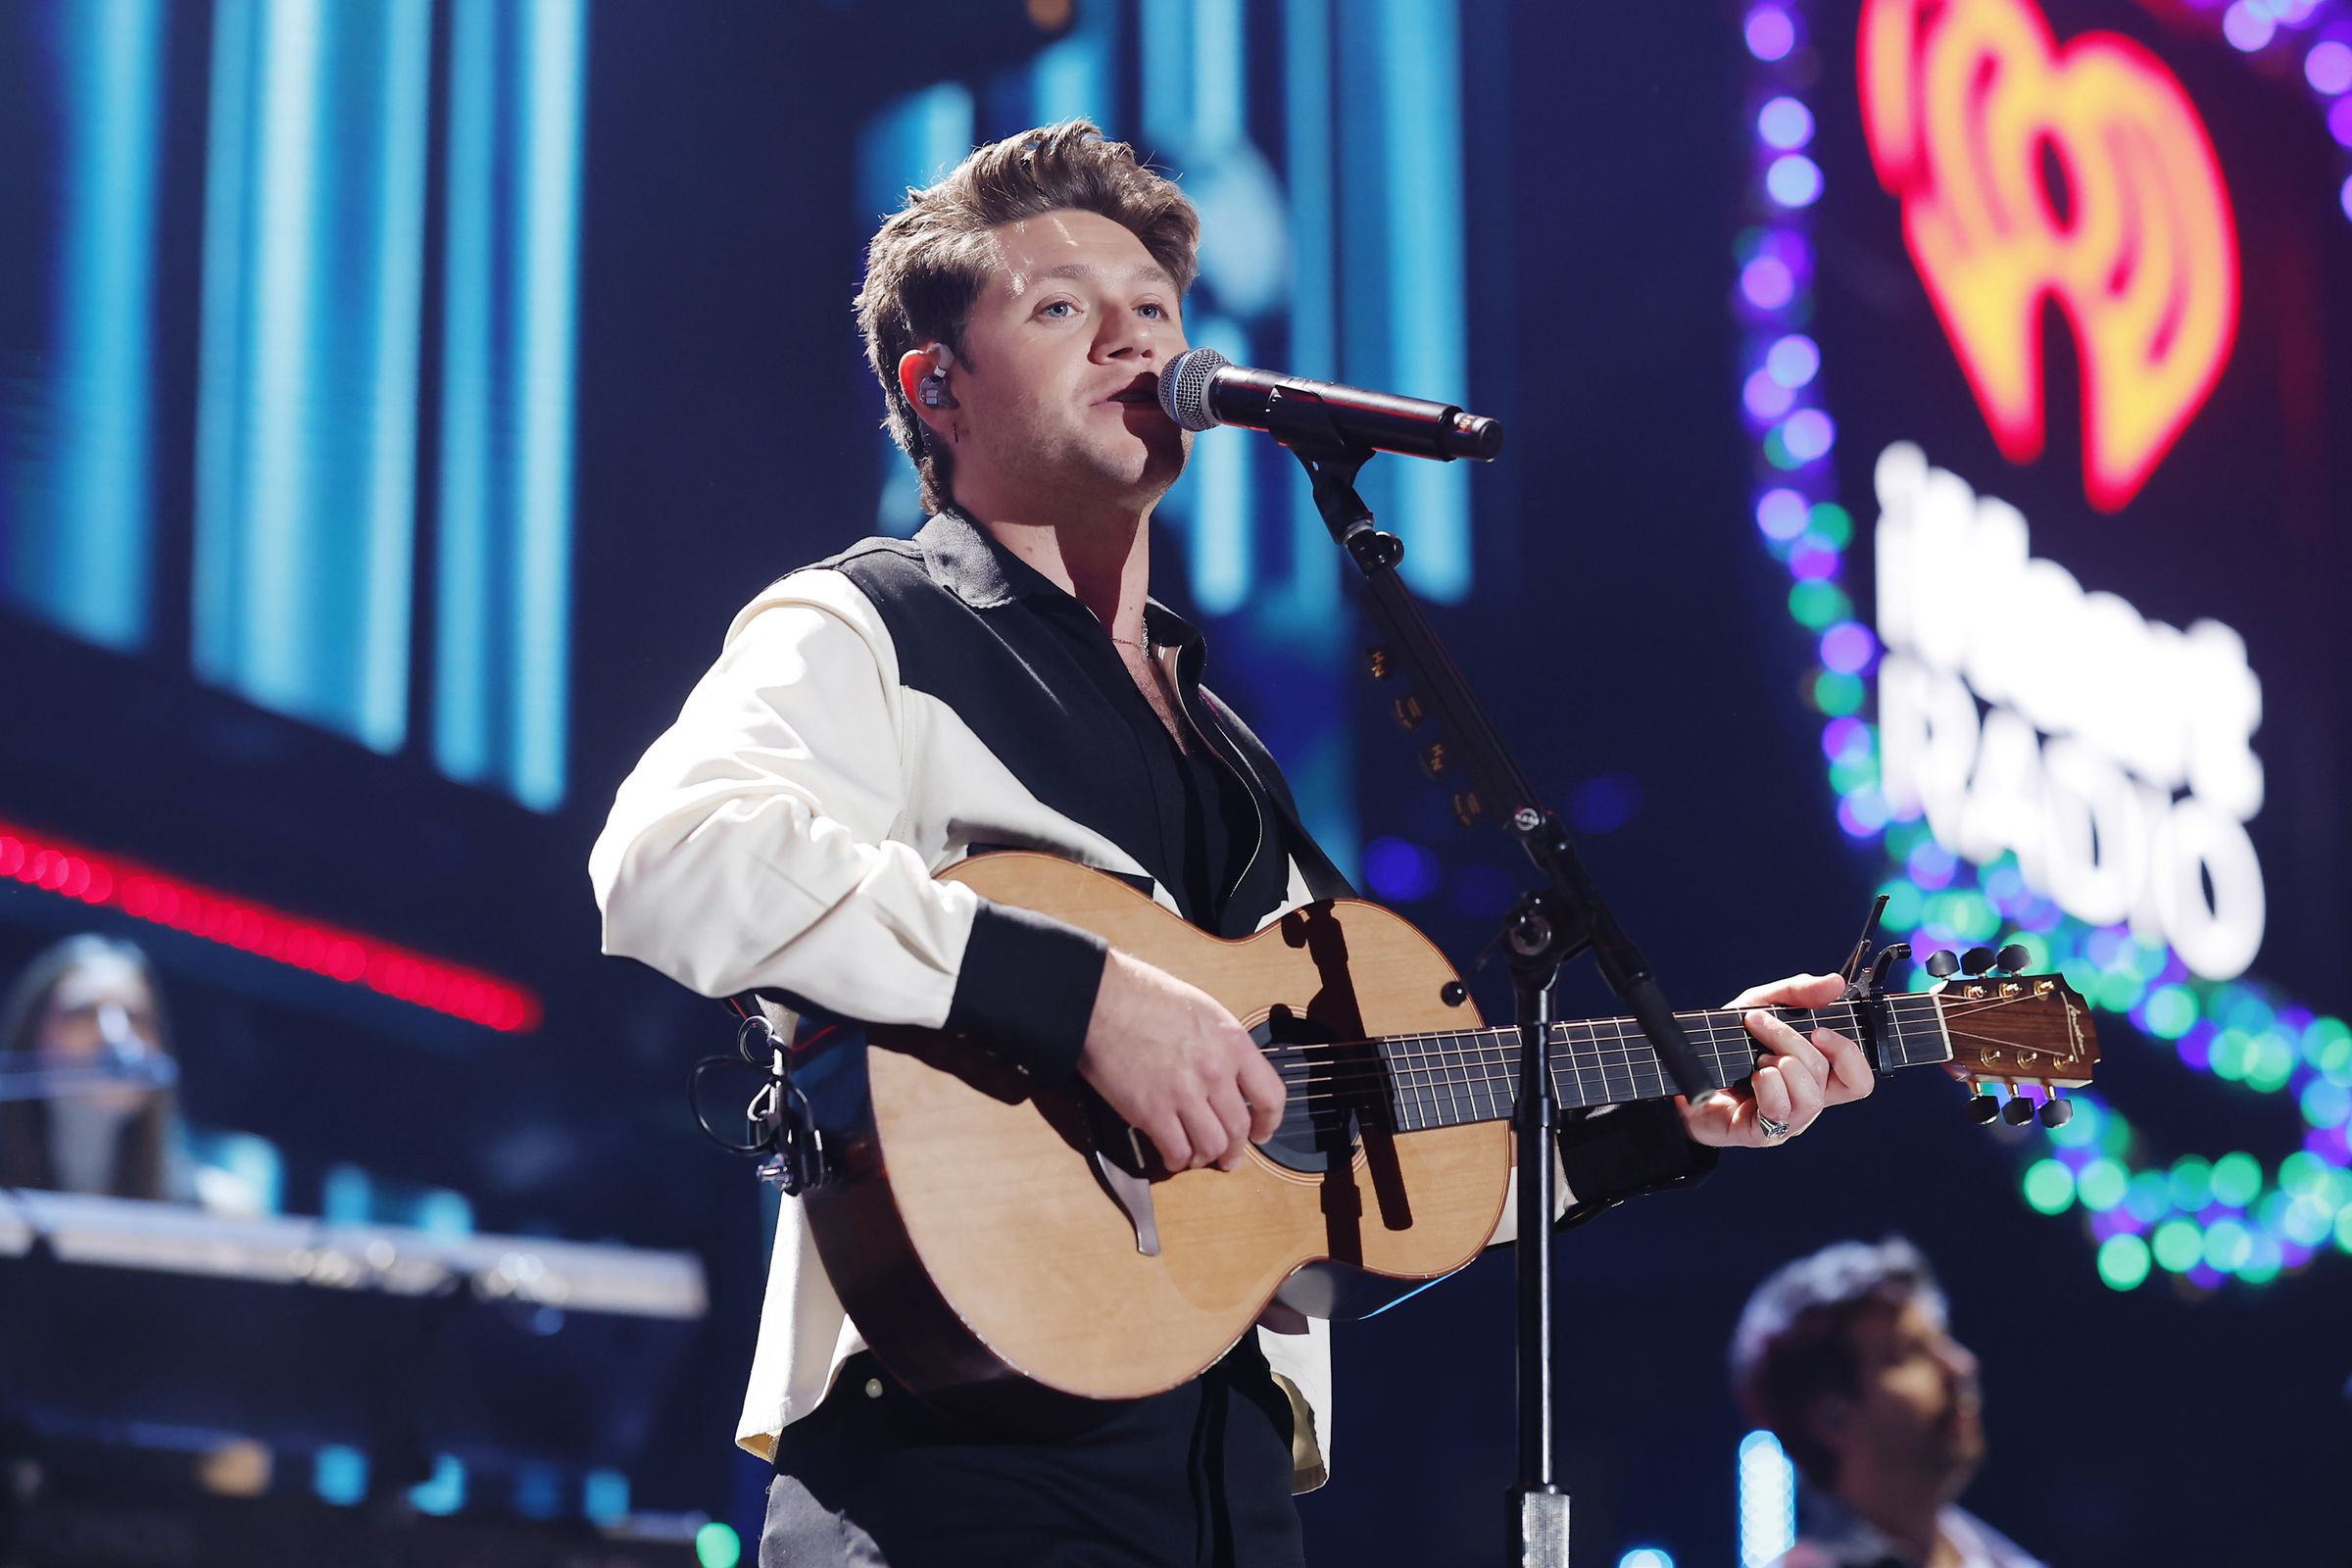 Niall Horan performs onstage at iHeartRadio 102.7 KIIS FM’s Jingle Ball 2023 presented by Capital One at the Kia Forum on December 1st, 2023